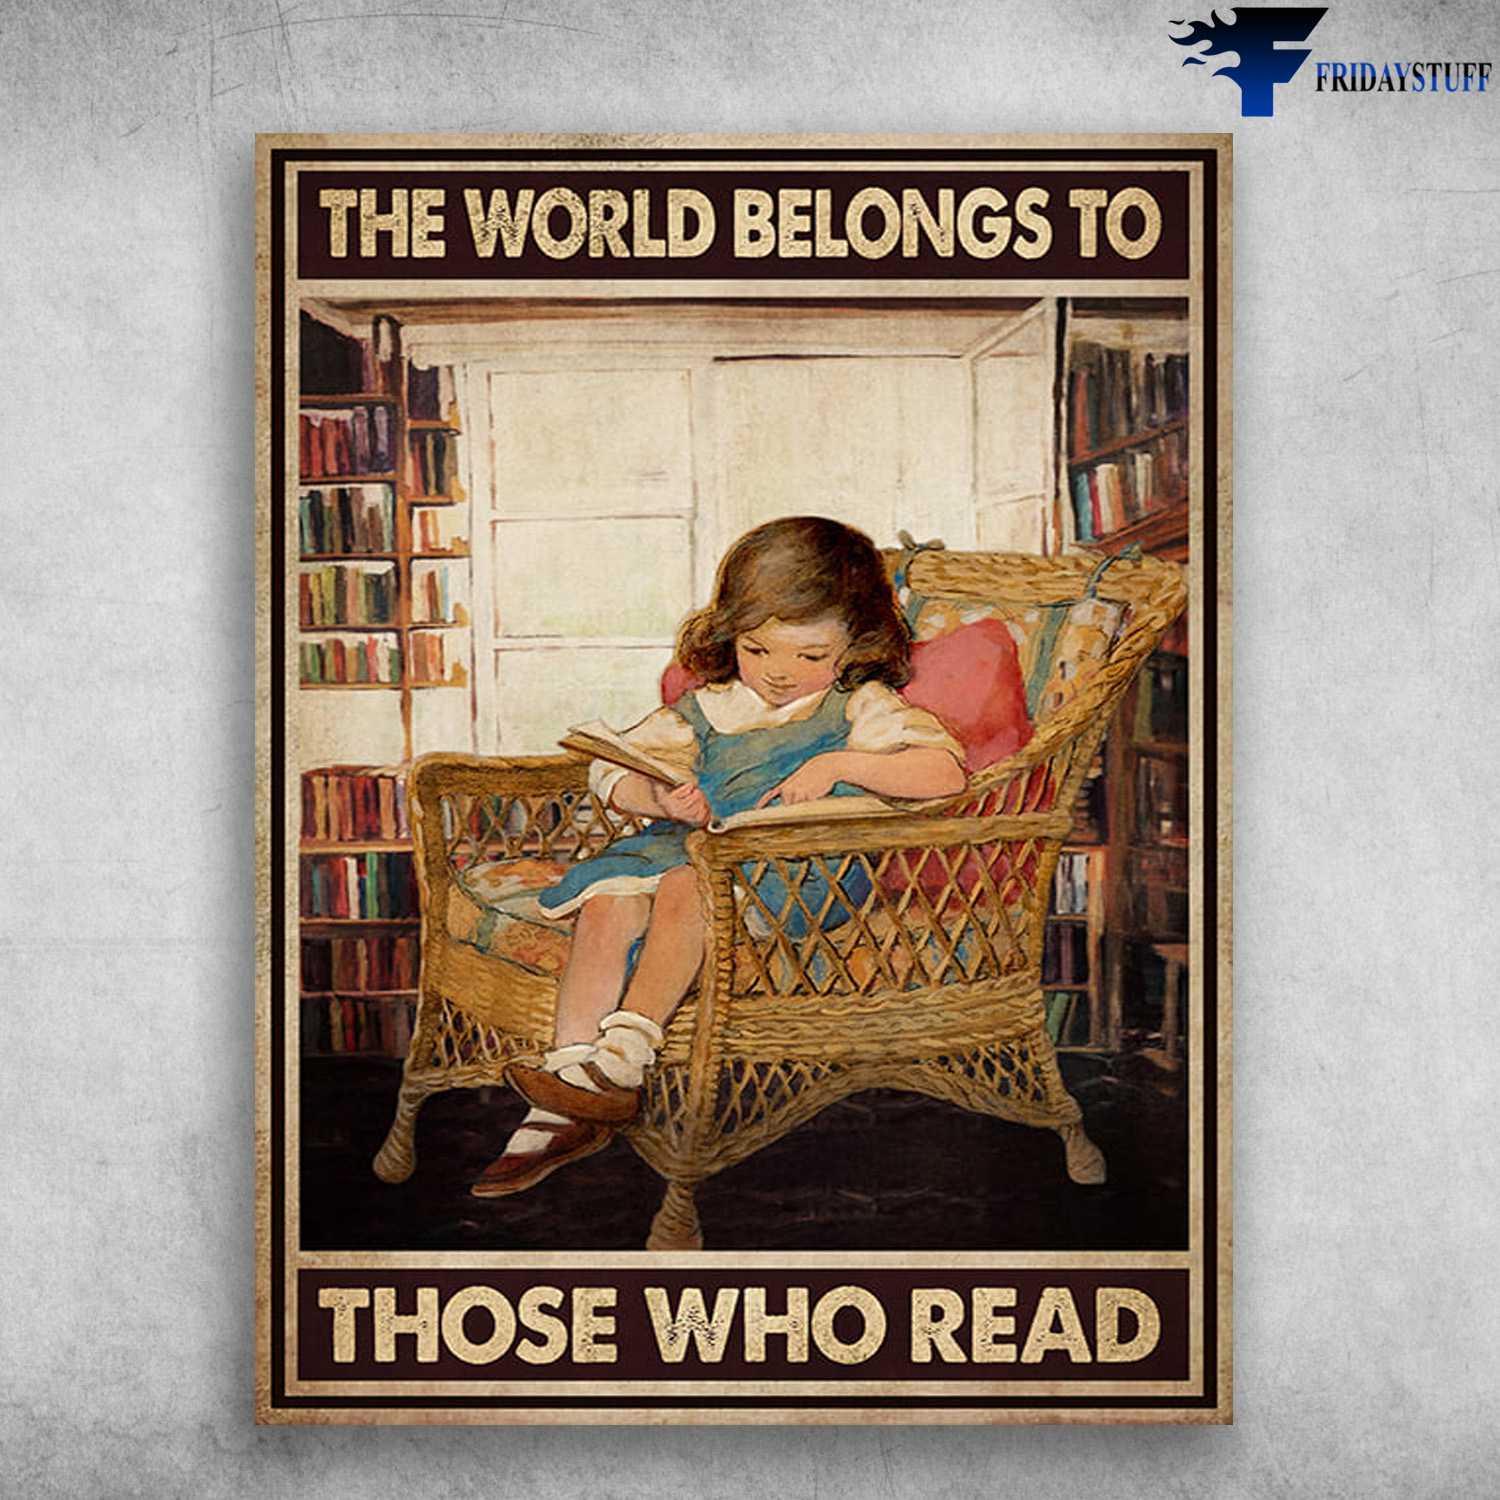 Book Reading, Book Lover - The World Belongs To, Those Who Read